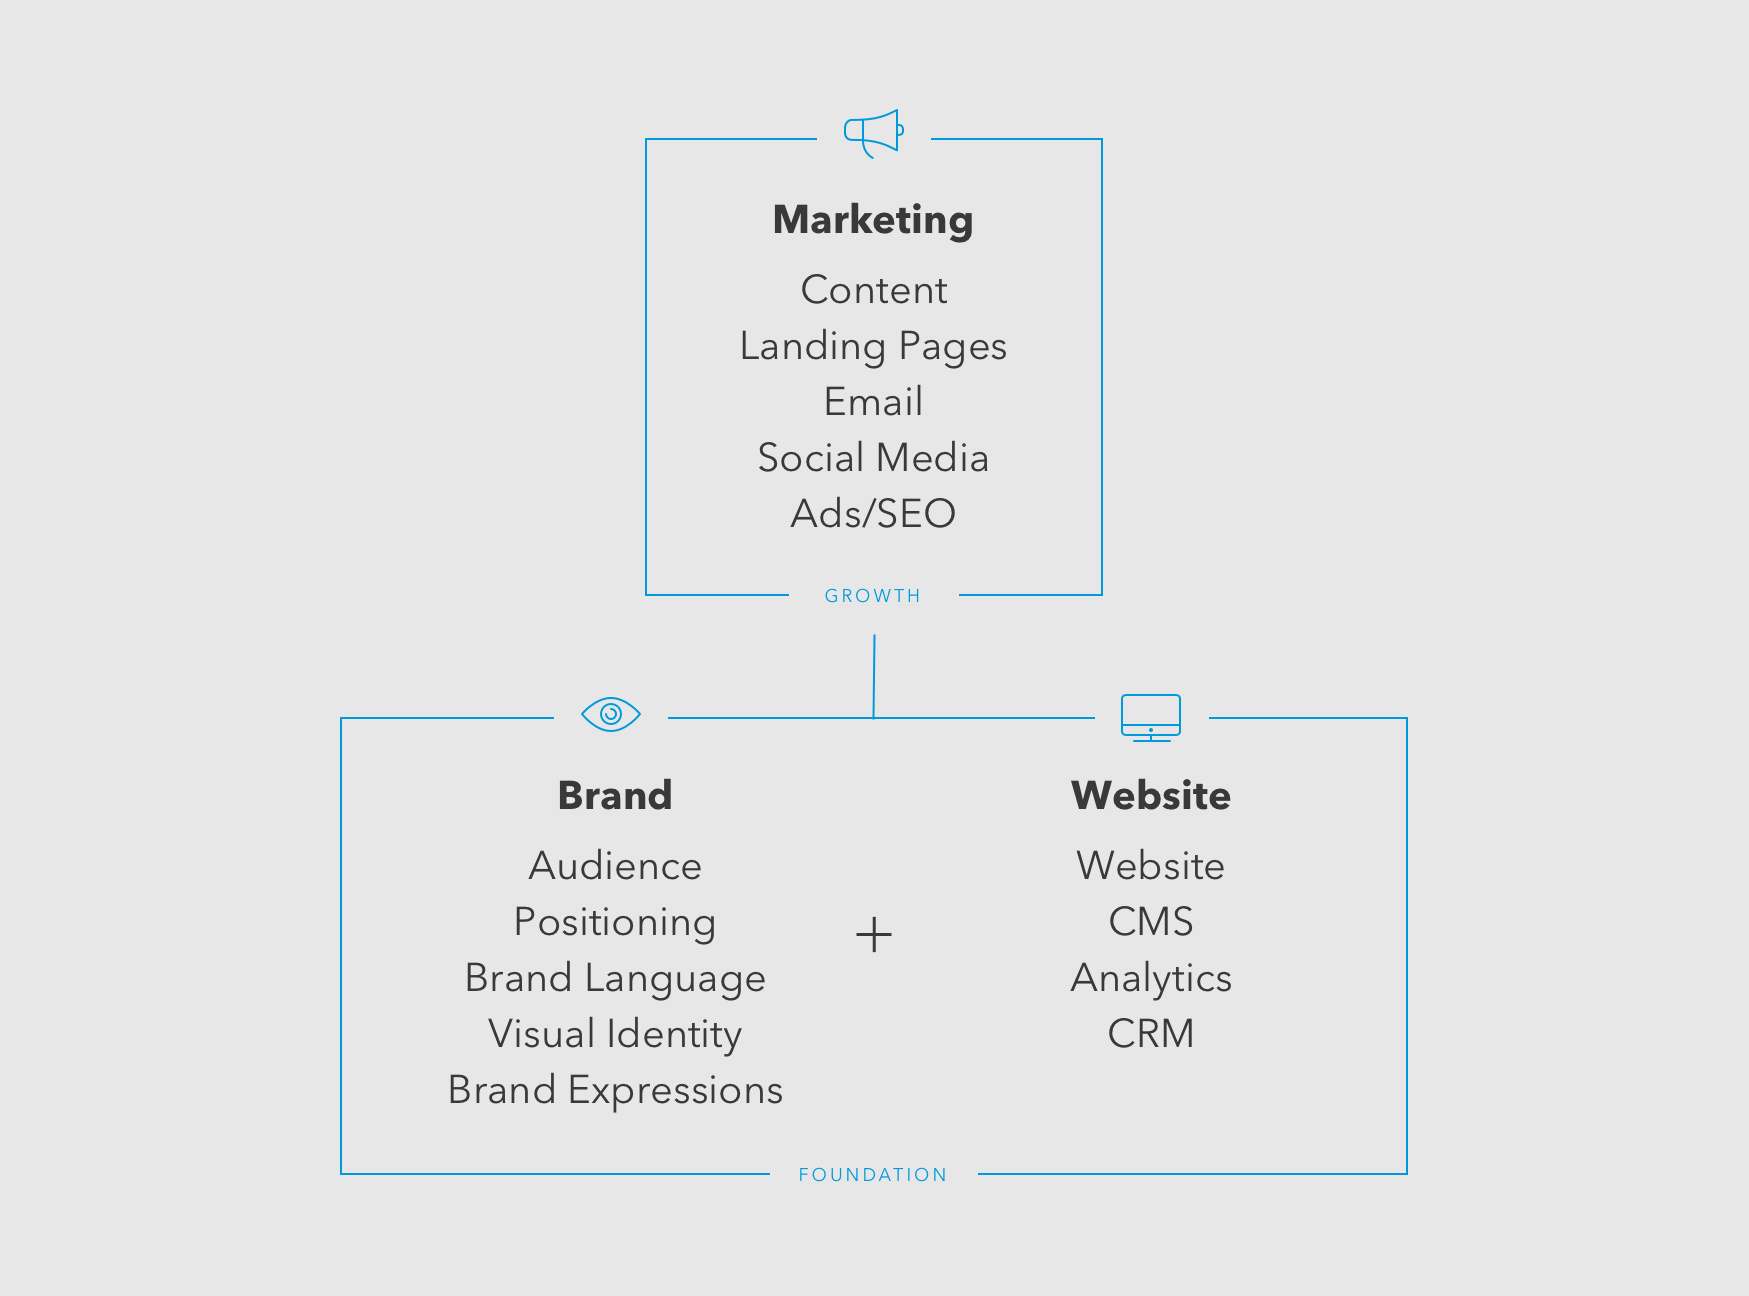 A chart showing branding and web design as the foundation for business, with marketing at the top to lead to growth